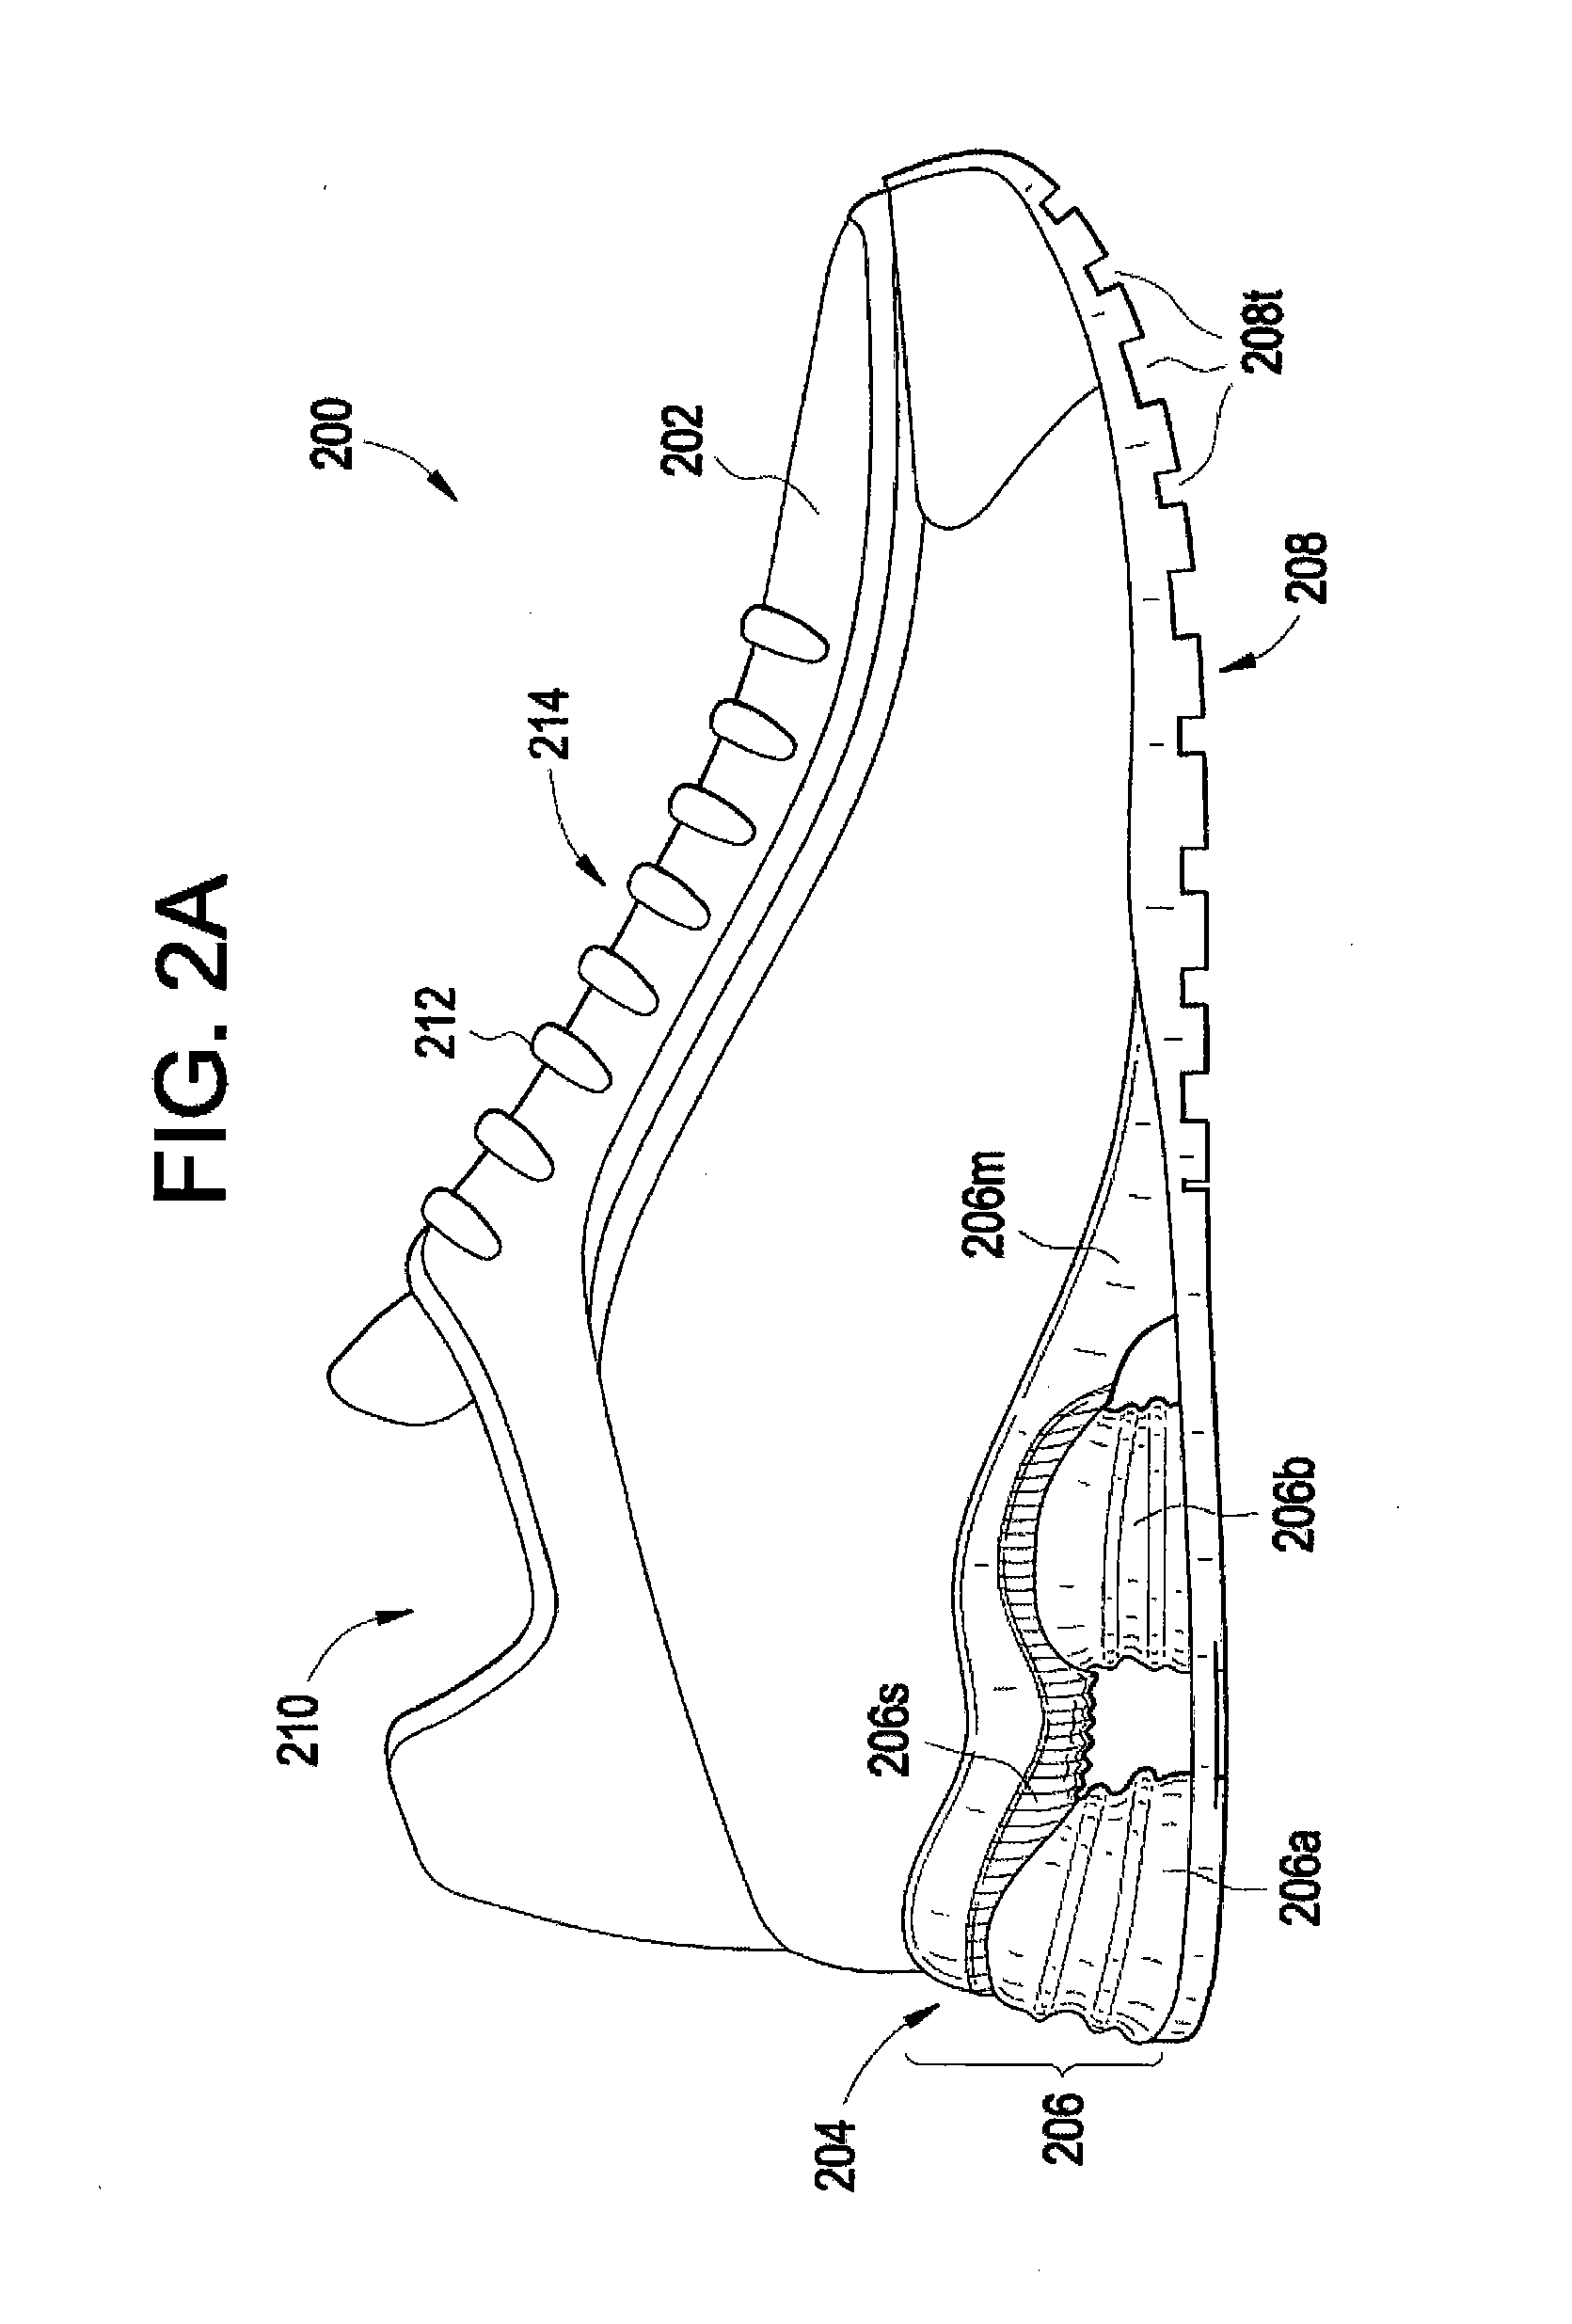 Article of Footwear with an Internal and External Midsole Structure